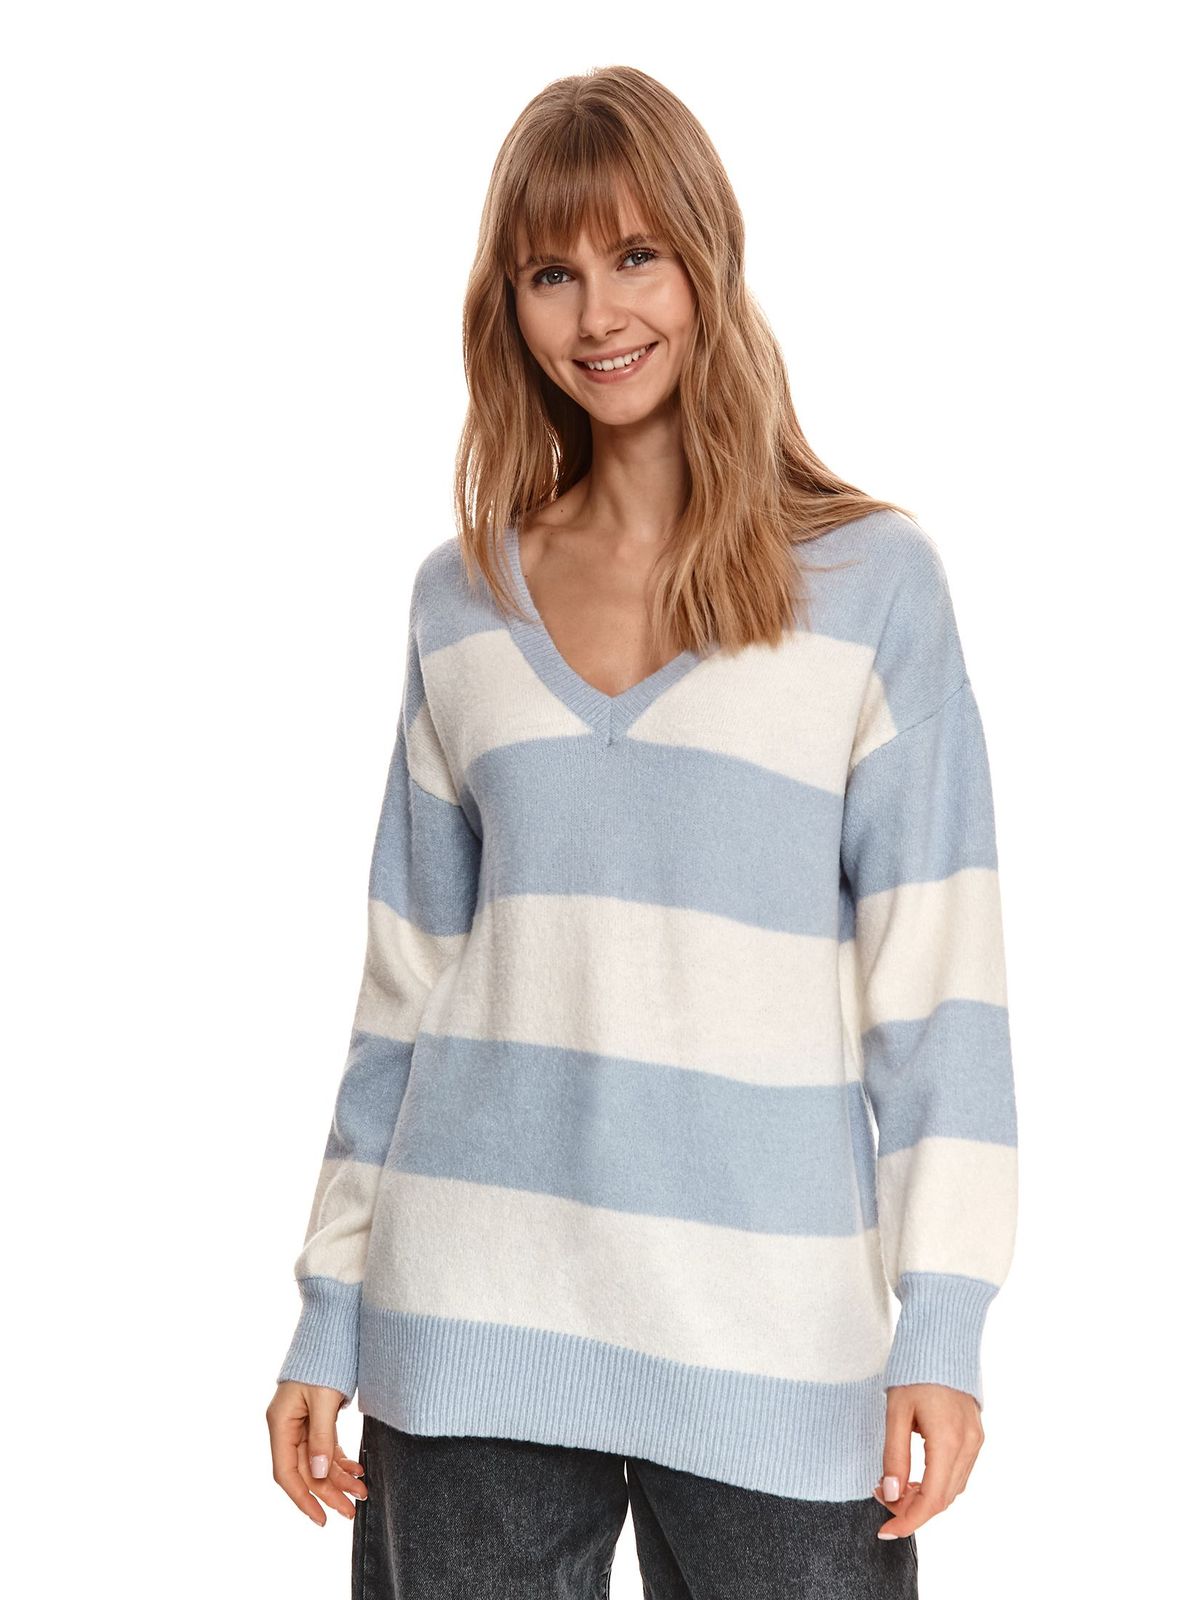 Lightblue sweater knitted with v-neckline loose fit